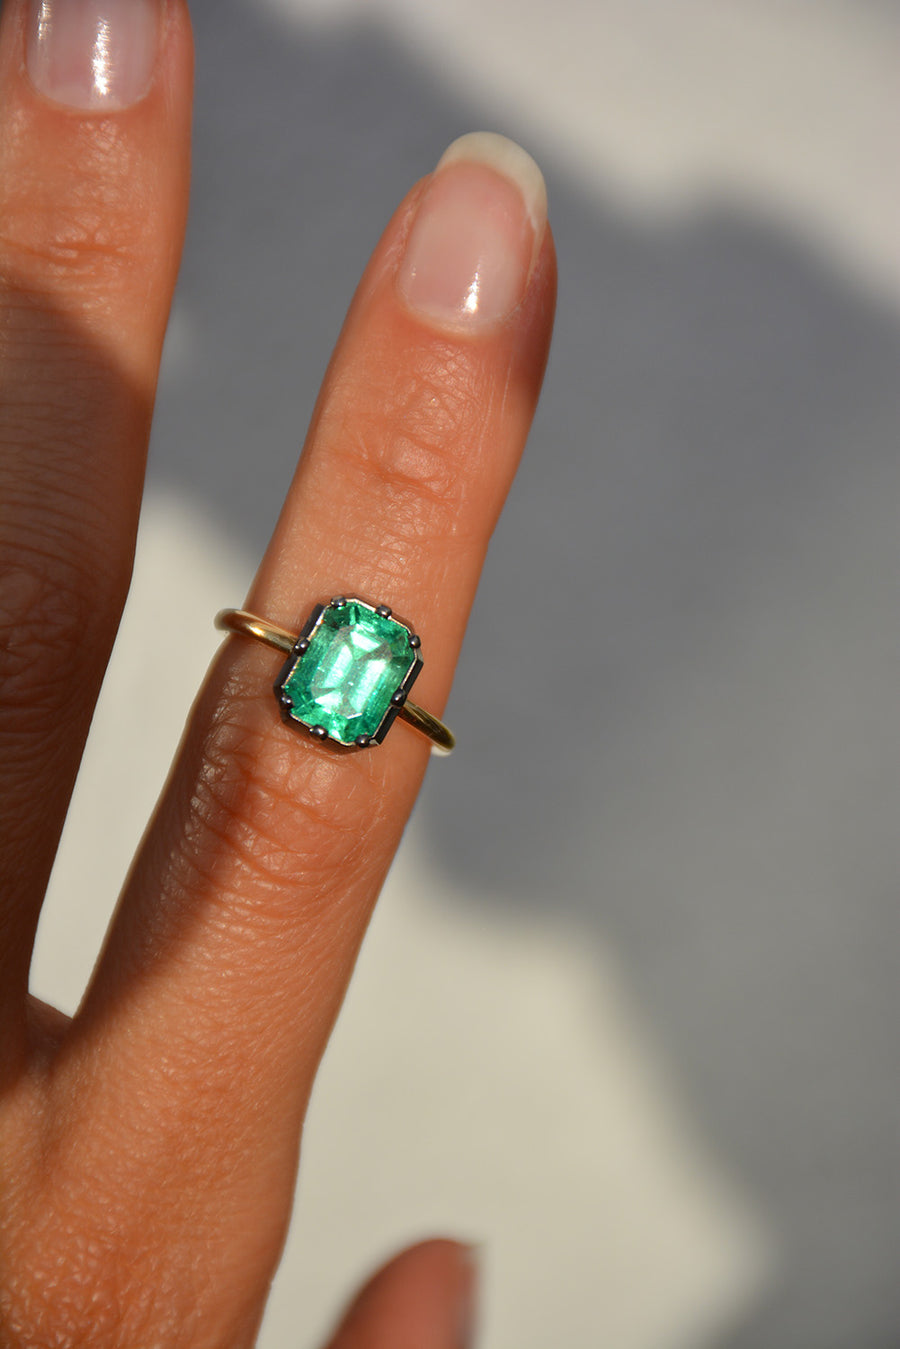 The Neon Green Emerald Ring